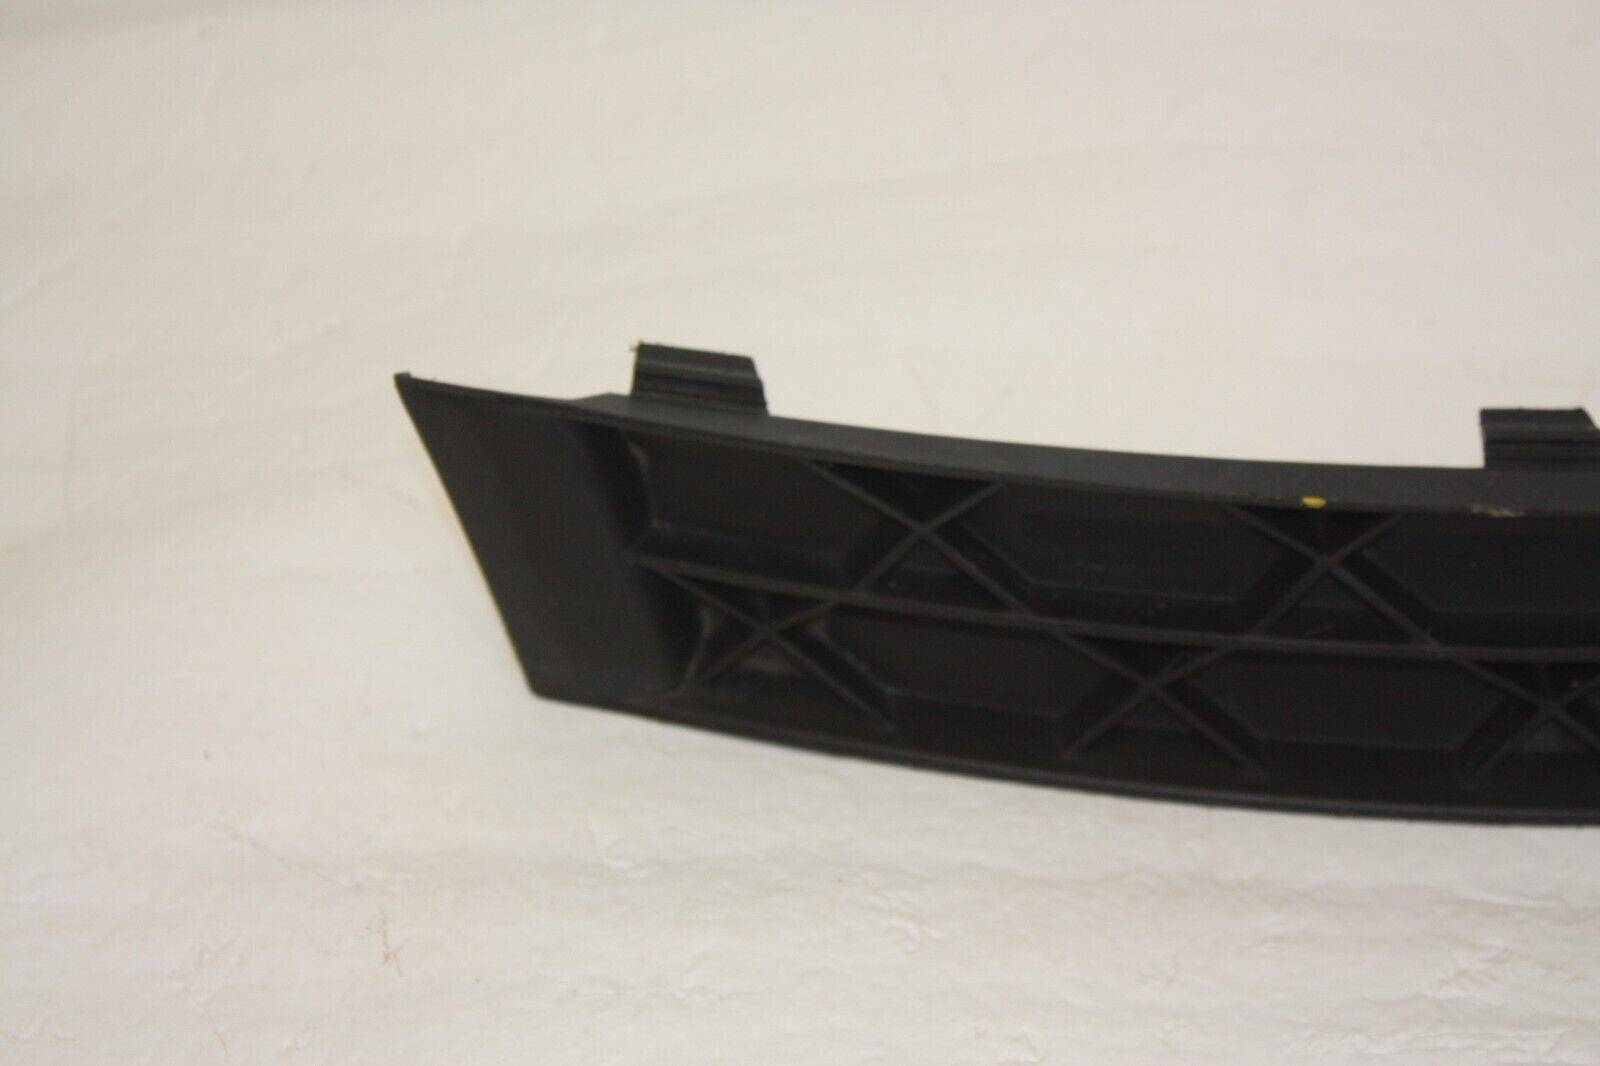 Citroen-C4-Picasso-Front-Bumper-Right-Lower-Grill-2007-TO-2011-9680403277-176254461016-4